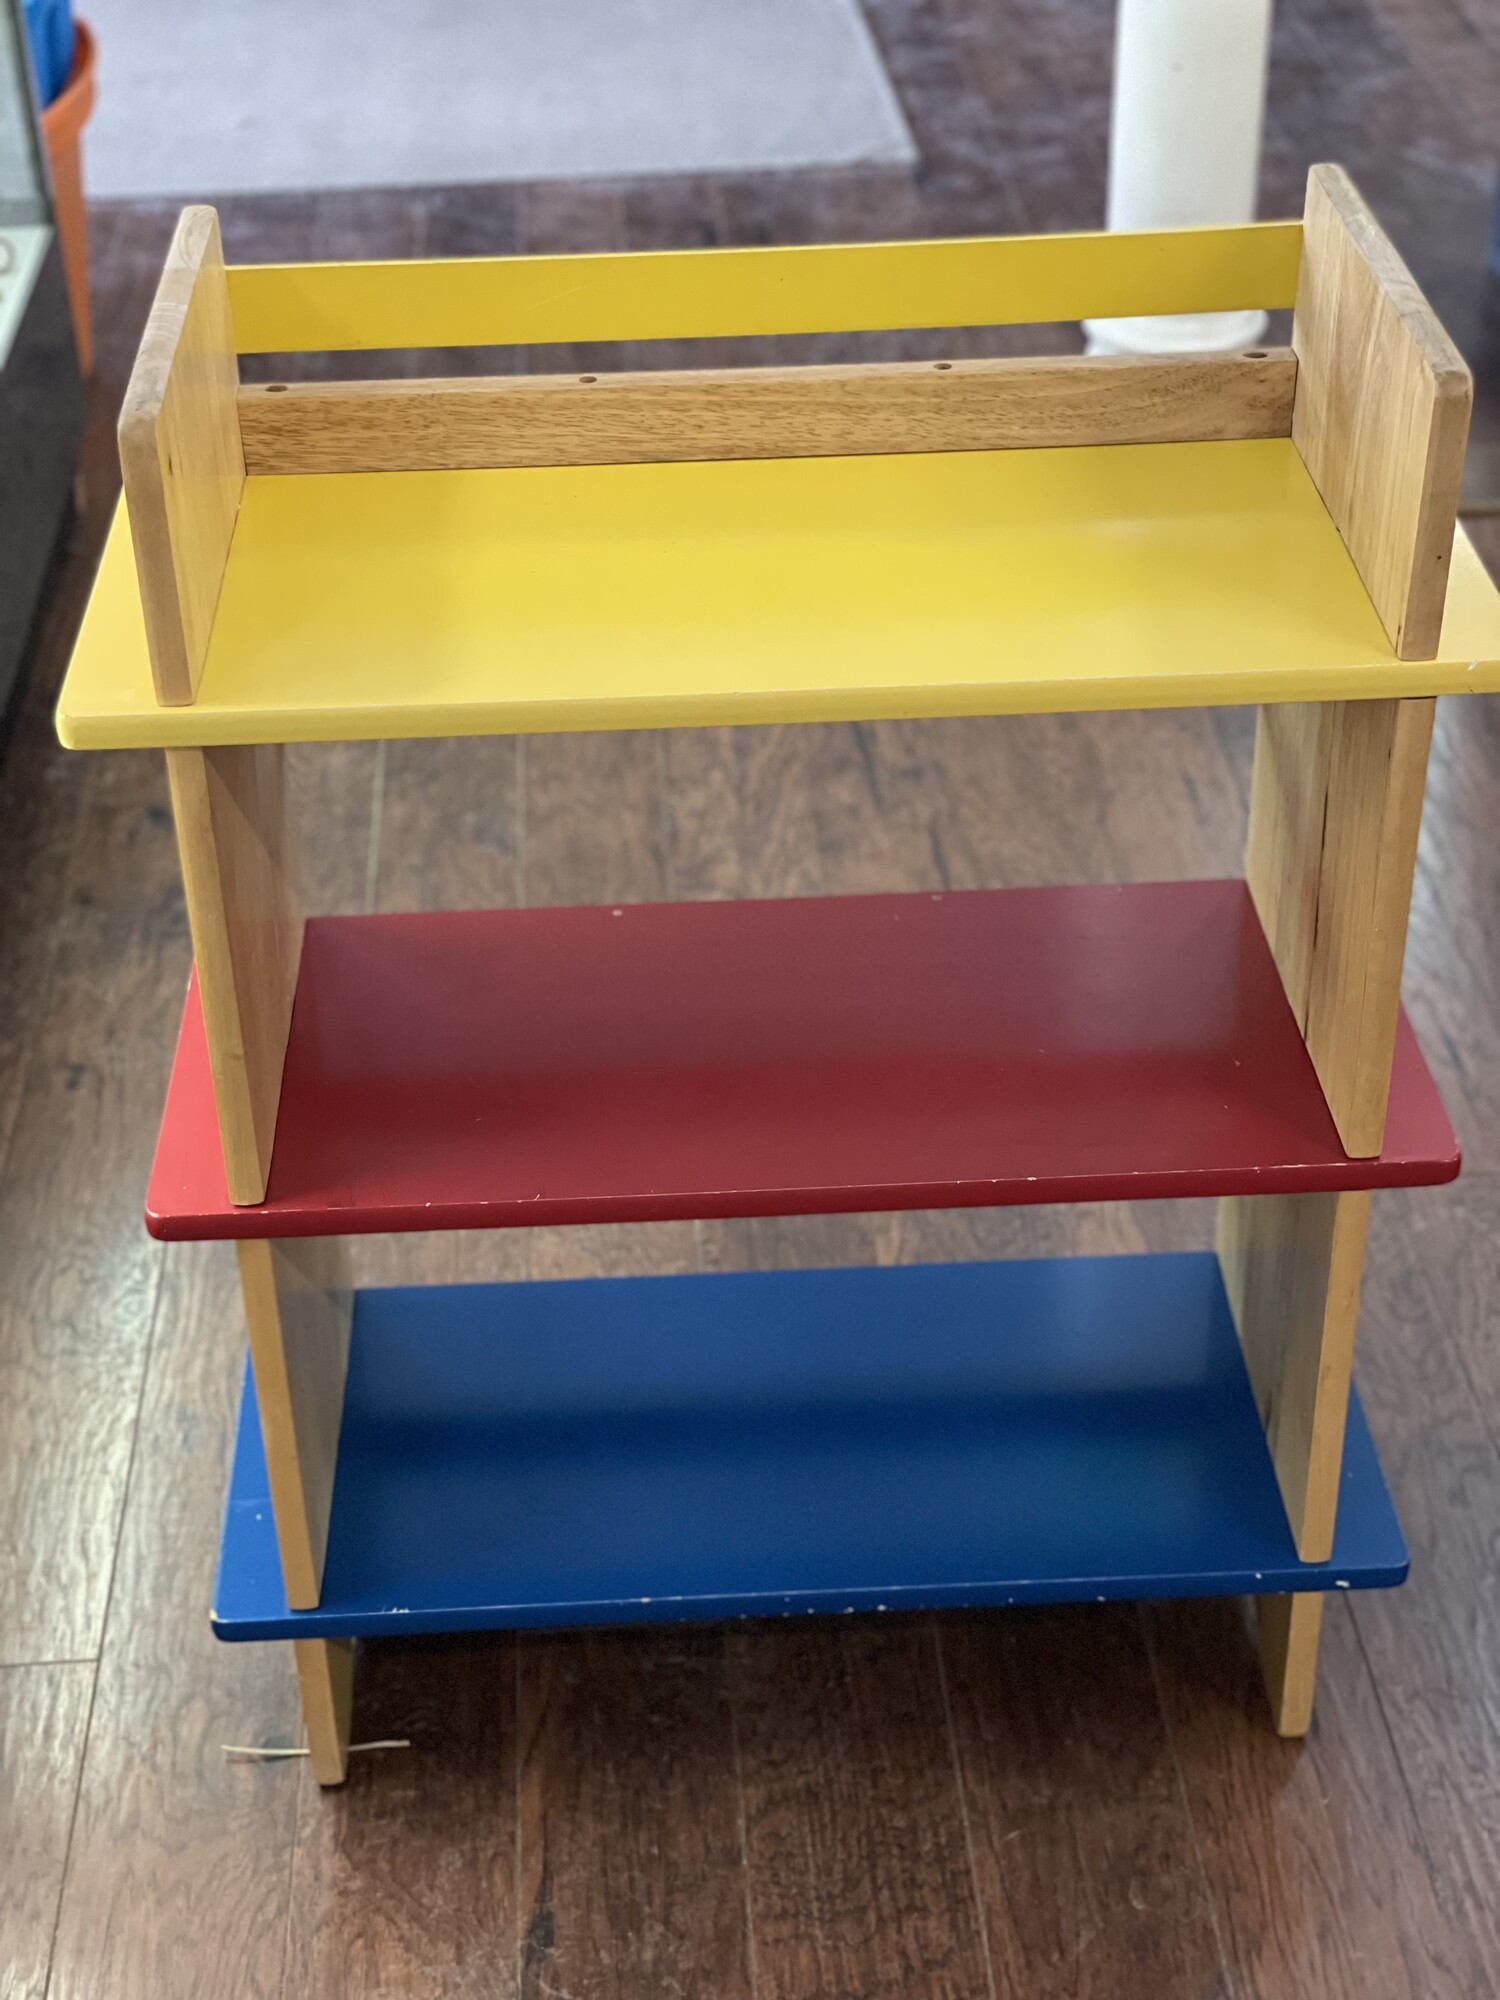 Childs Bookshelf
Solid wood
Yellow, blue, red, tan
Size: 35 H x  28 L x 12D